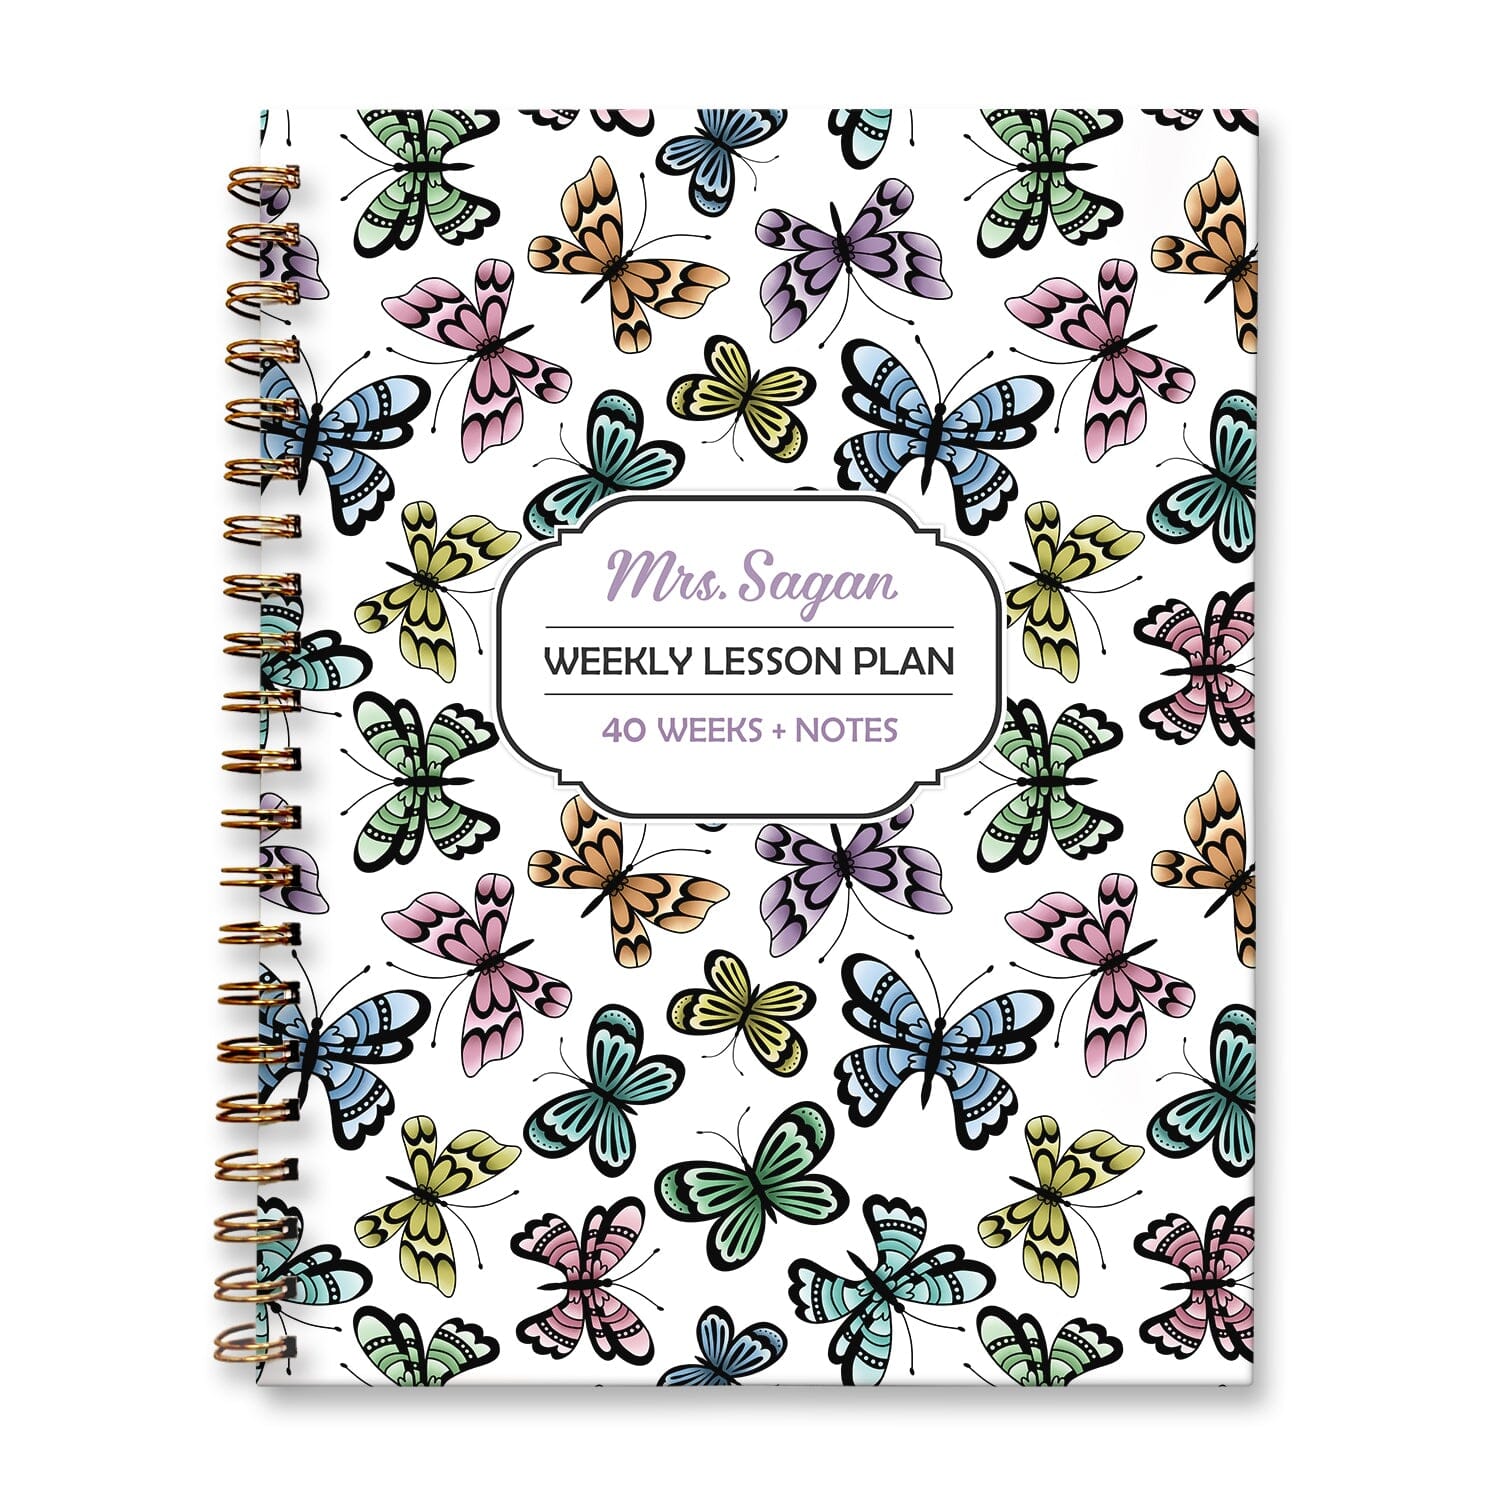 Personalized Pretty Butterfly Weekly Lesson Plan Book at Artistically Invited. Hardcover planner book for teachers or homeschooling.